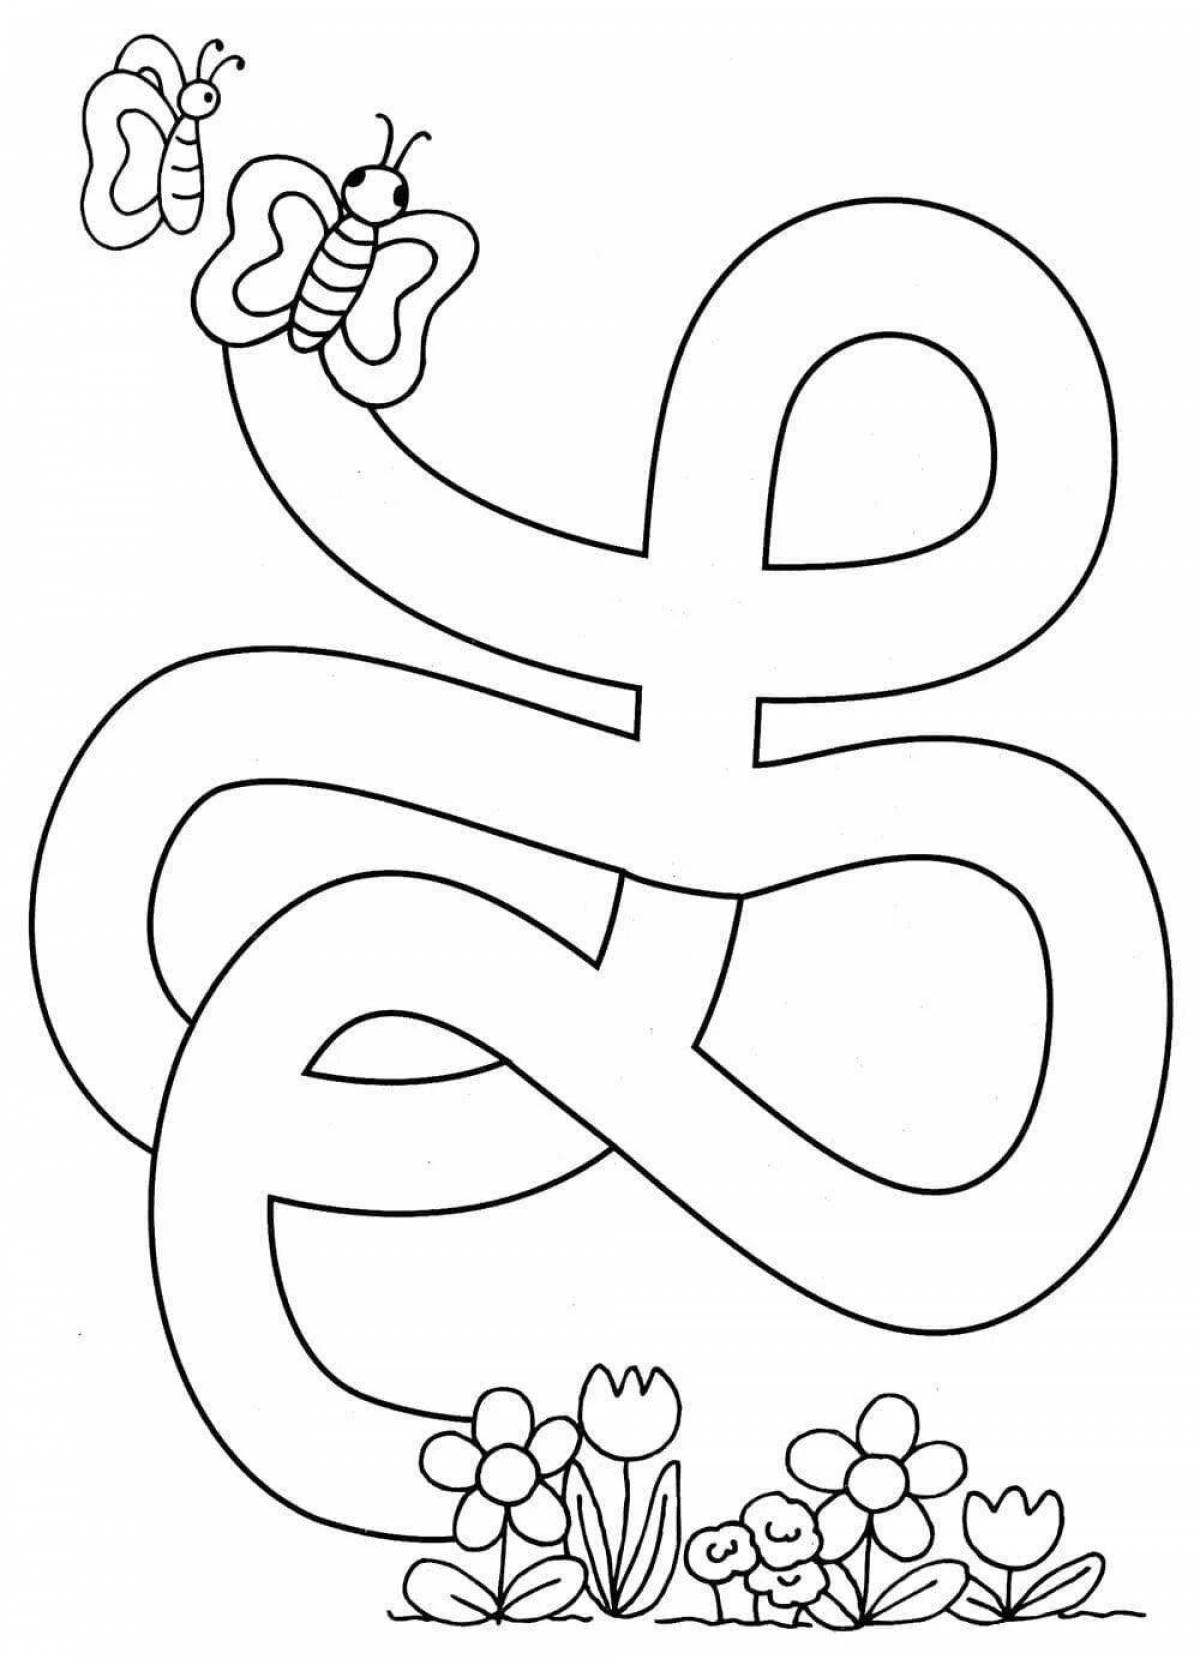 Adorable maze coloring book for 4 year olds